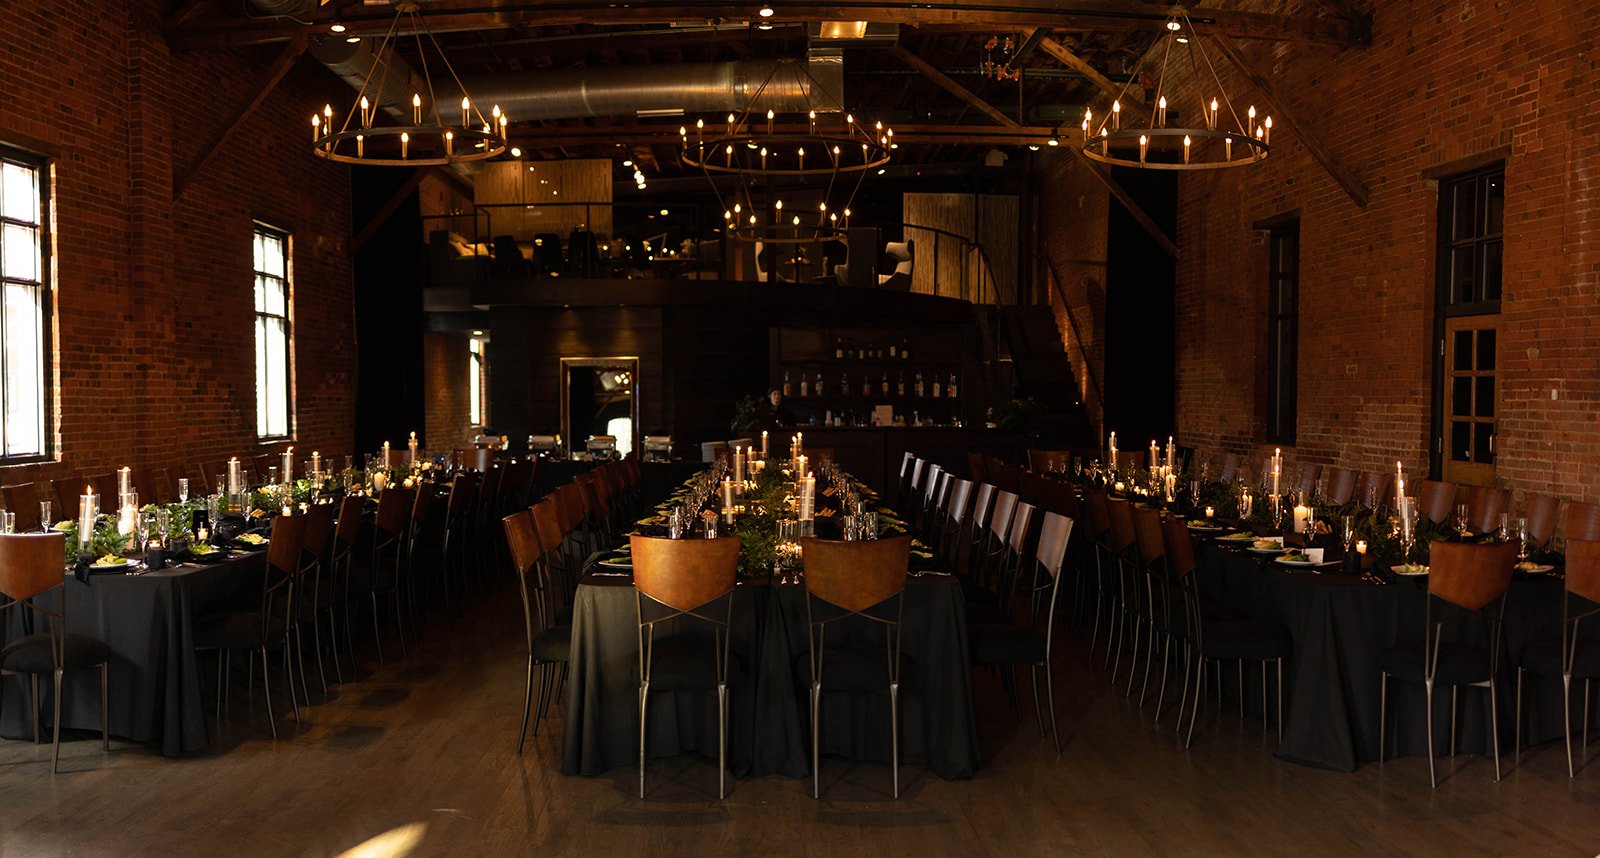  A moody, dimly lit reception hall with long tables, black tablecloths, and candlesticks down the center of the tables. Two-tiered rustic candelabra chandeliers hover over the room. 